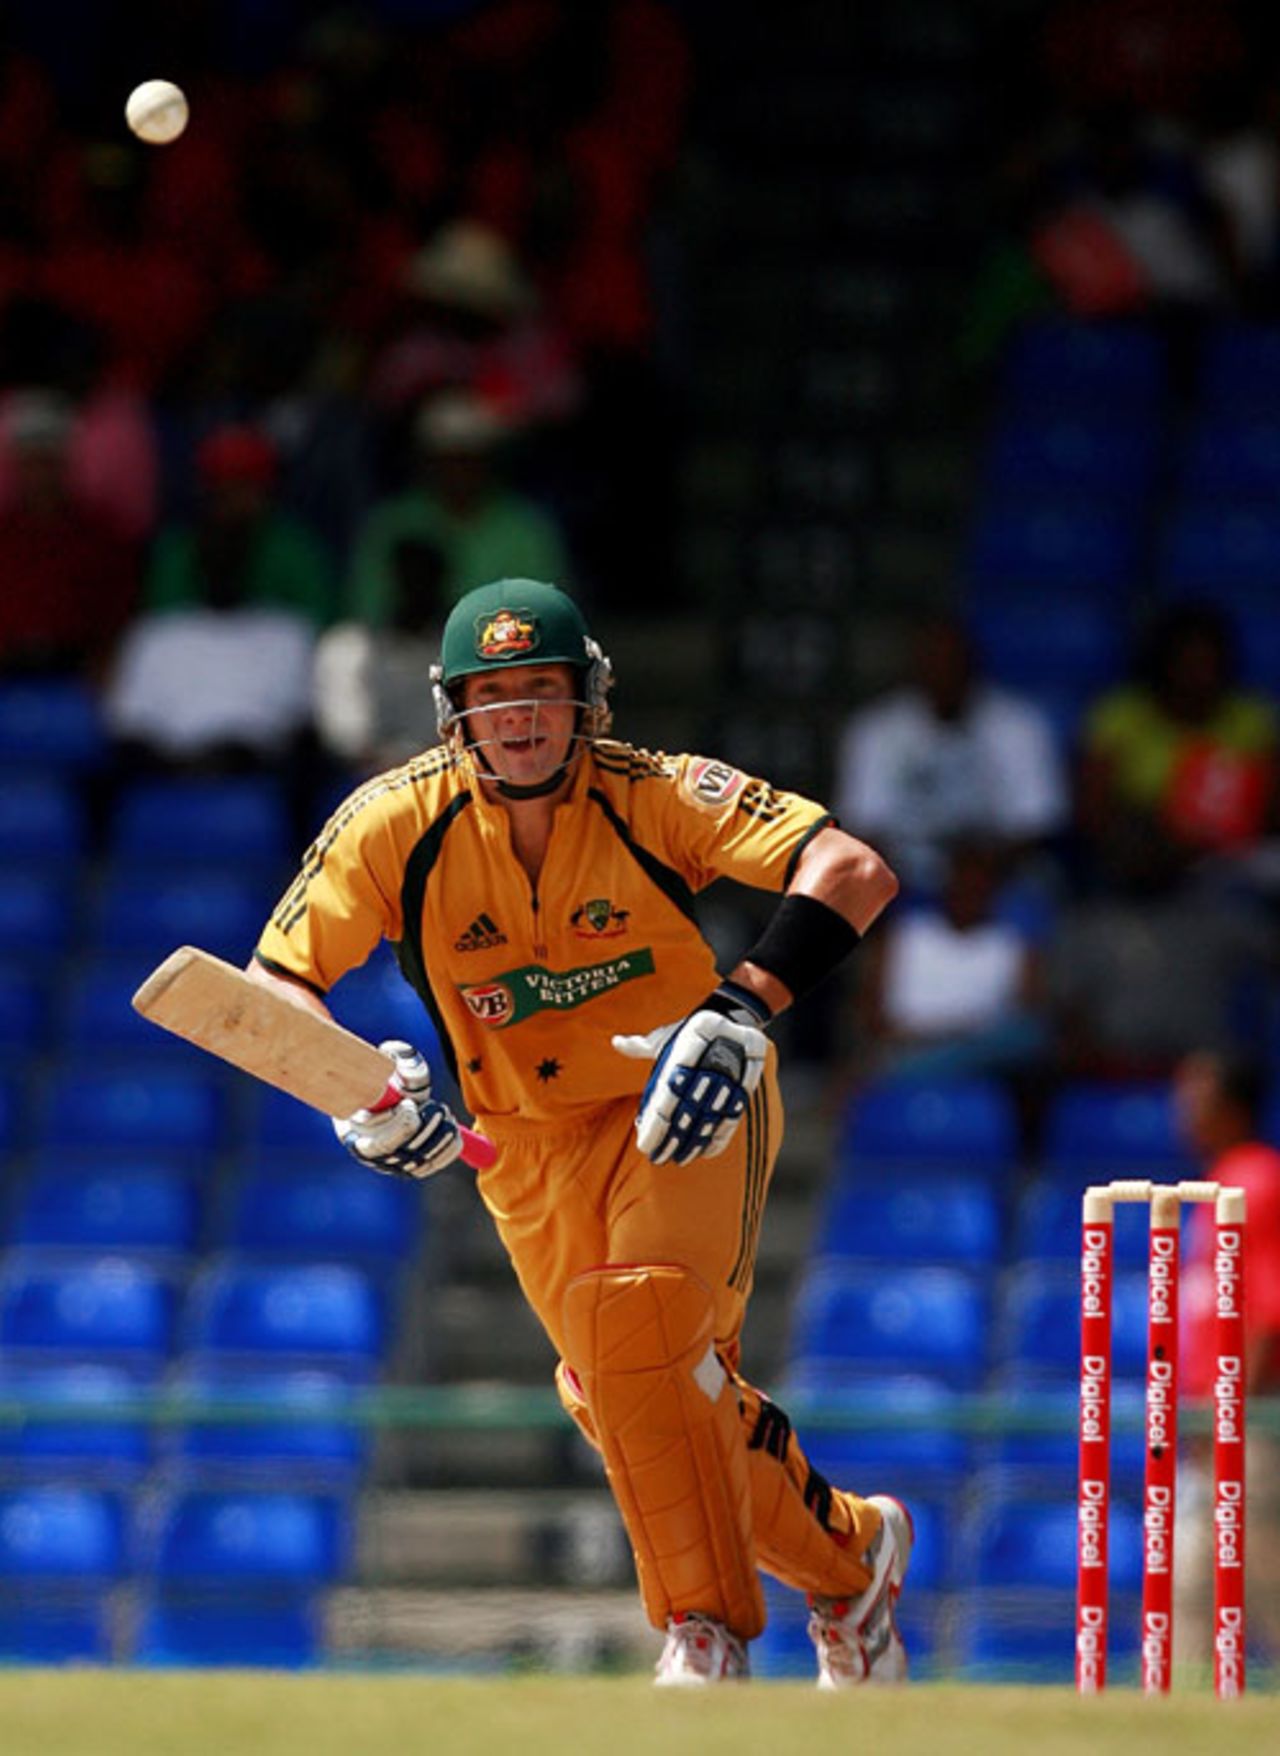 Shane Watson takes off for a run, West Indies v Australia, 5th ODI, St Kitts, July 6, 2008